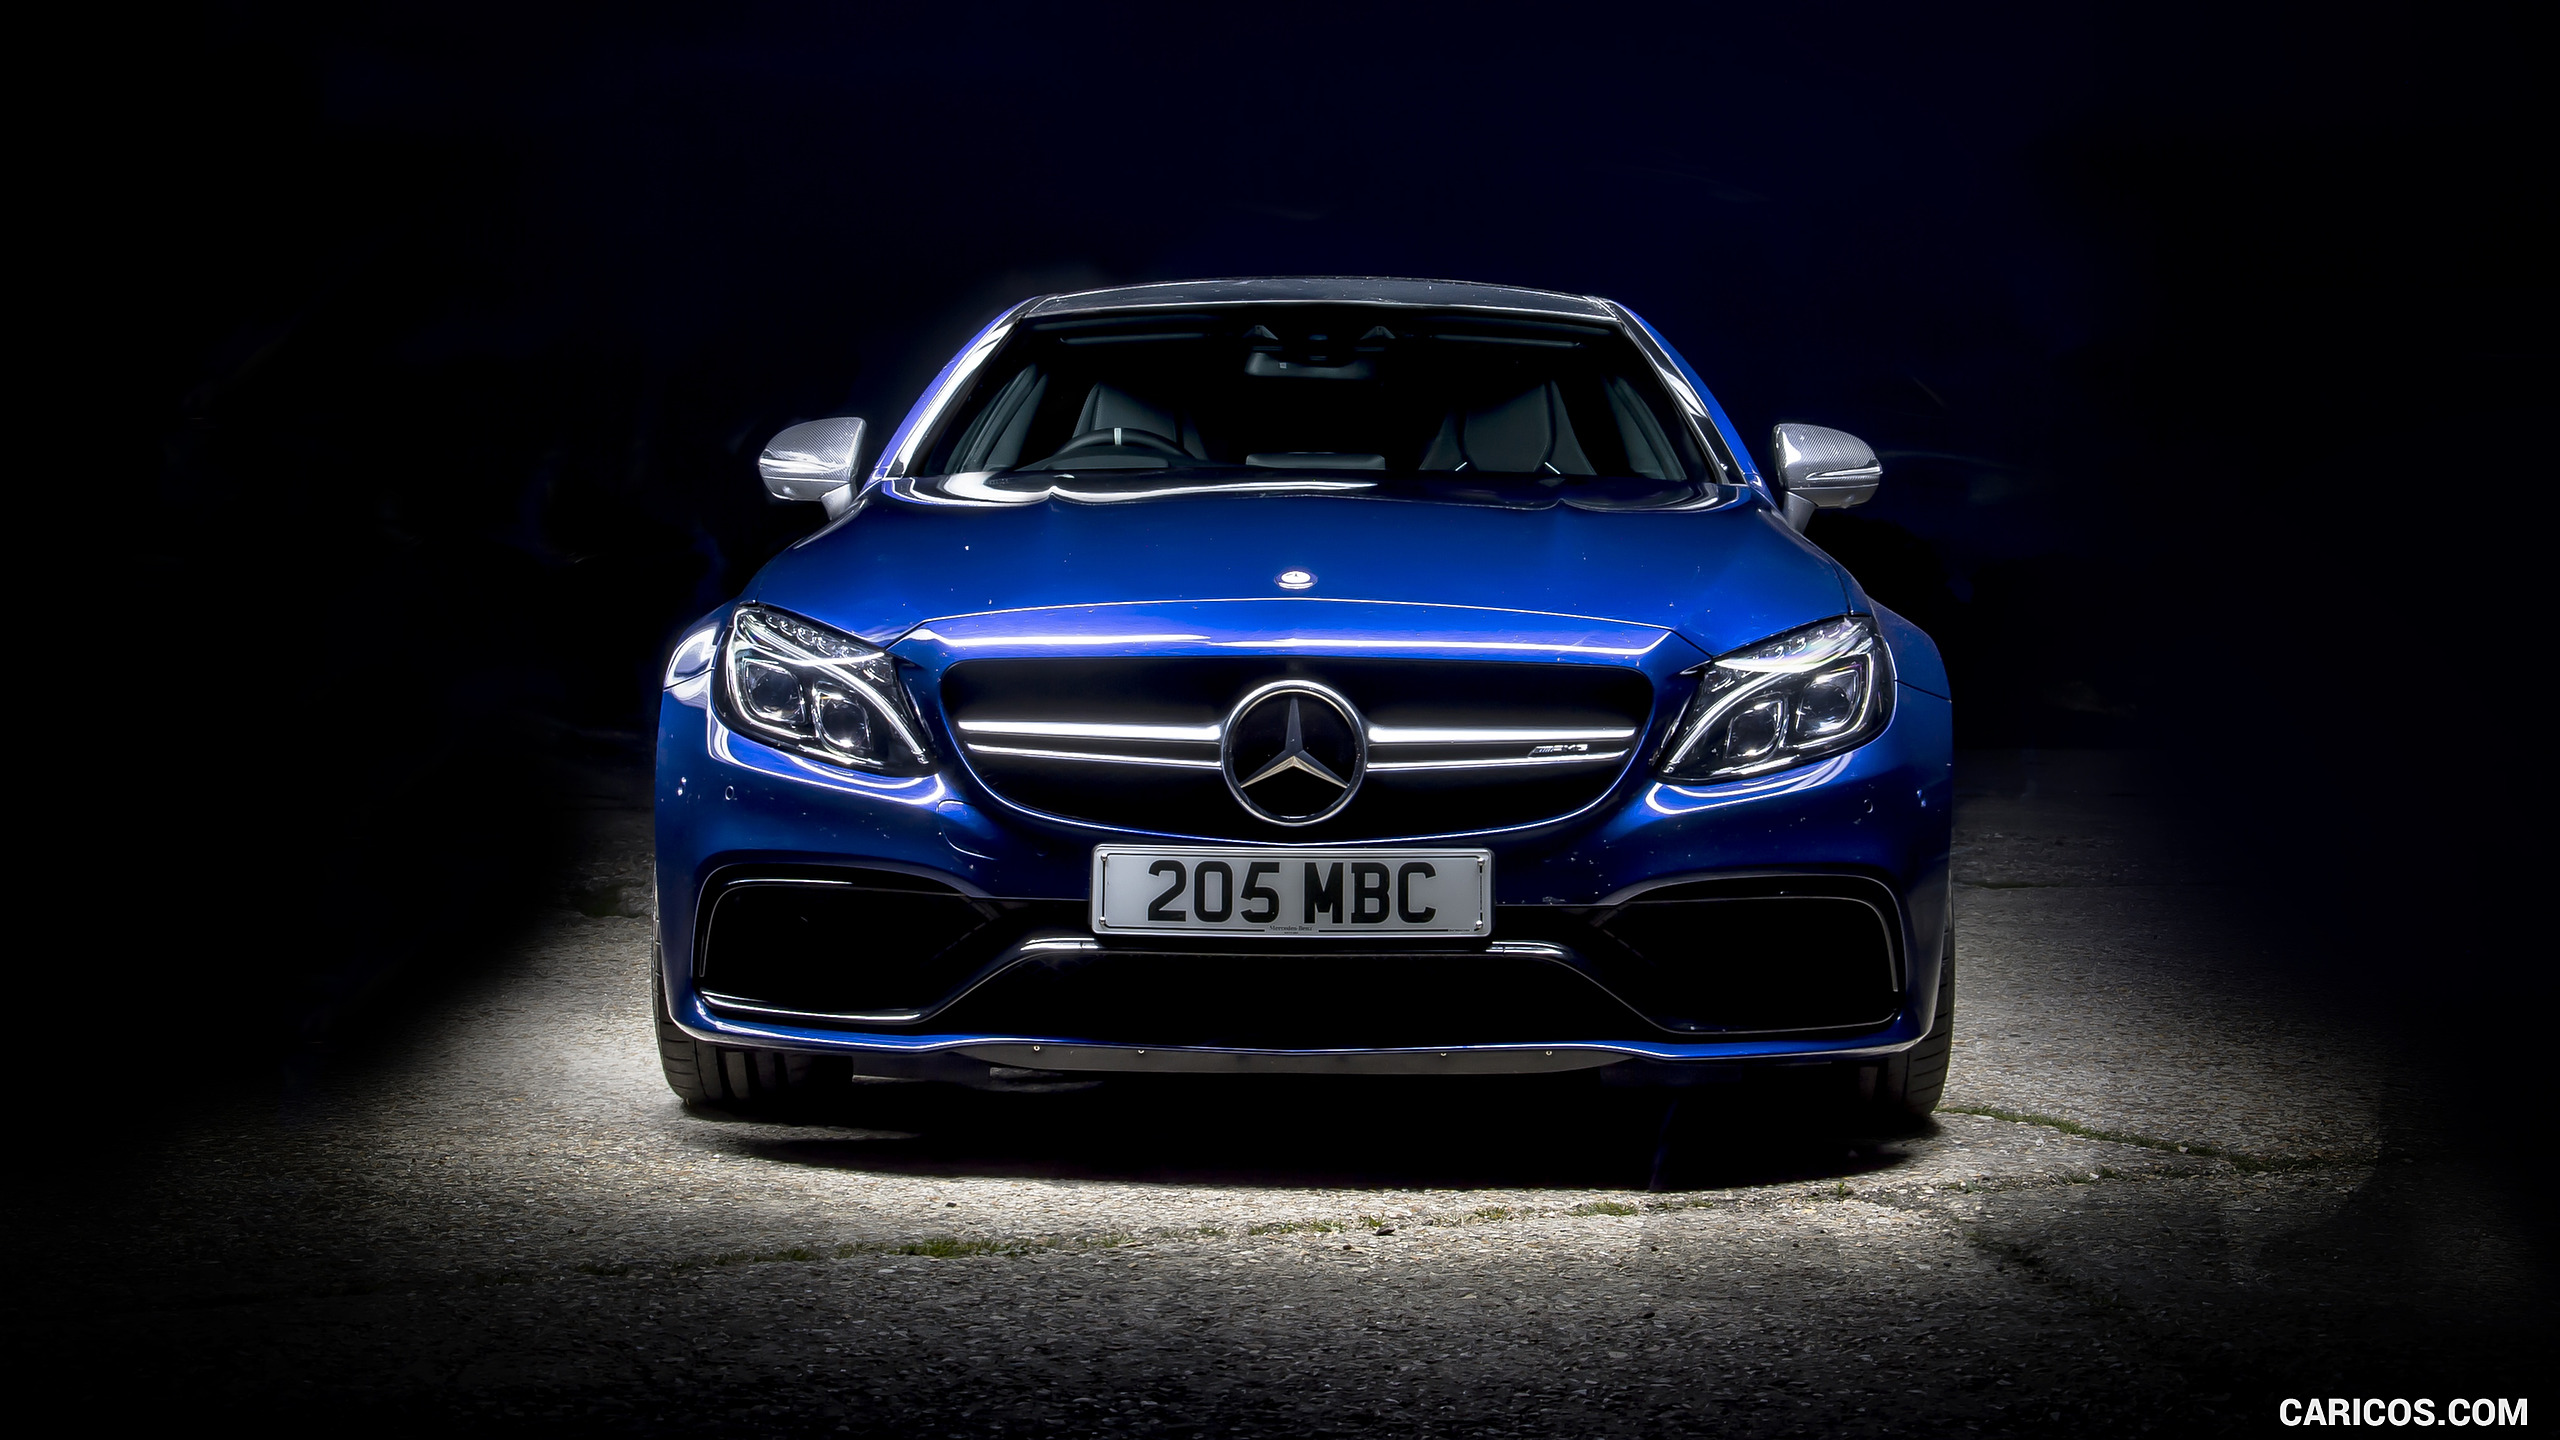 2017 Mercedes-AMG C63 S Coupe (UK-Spec) - Front, #51 of 52